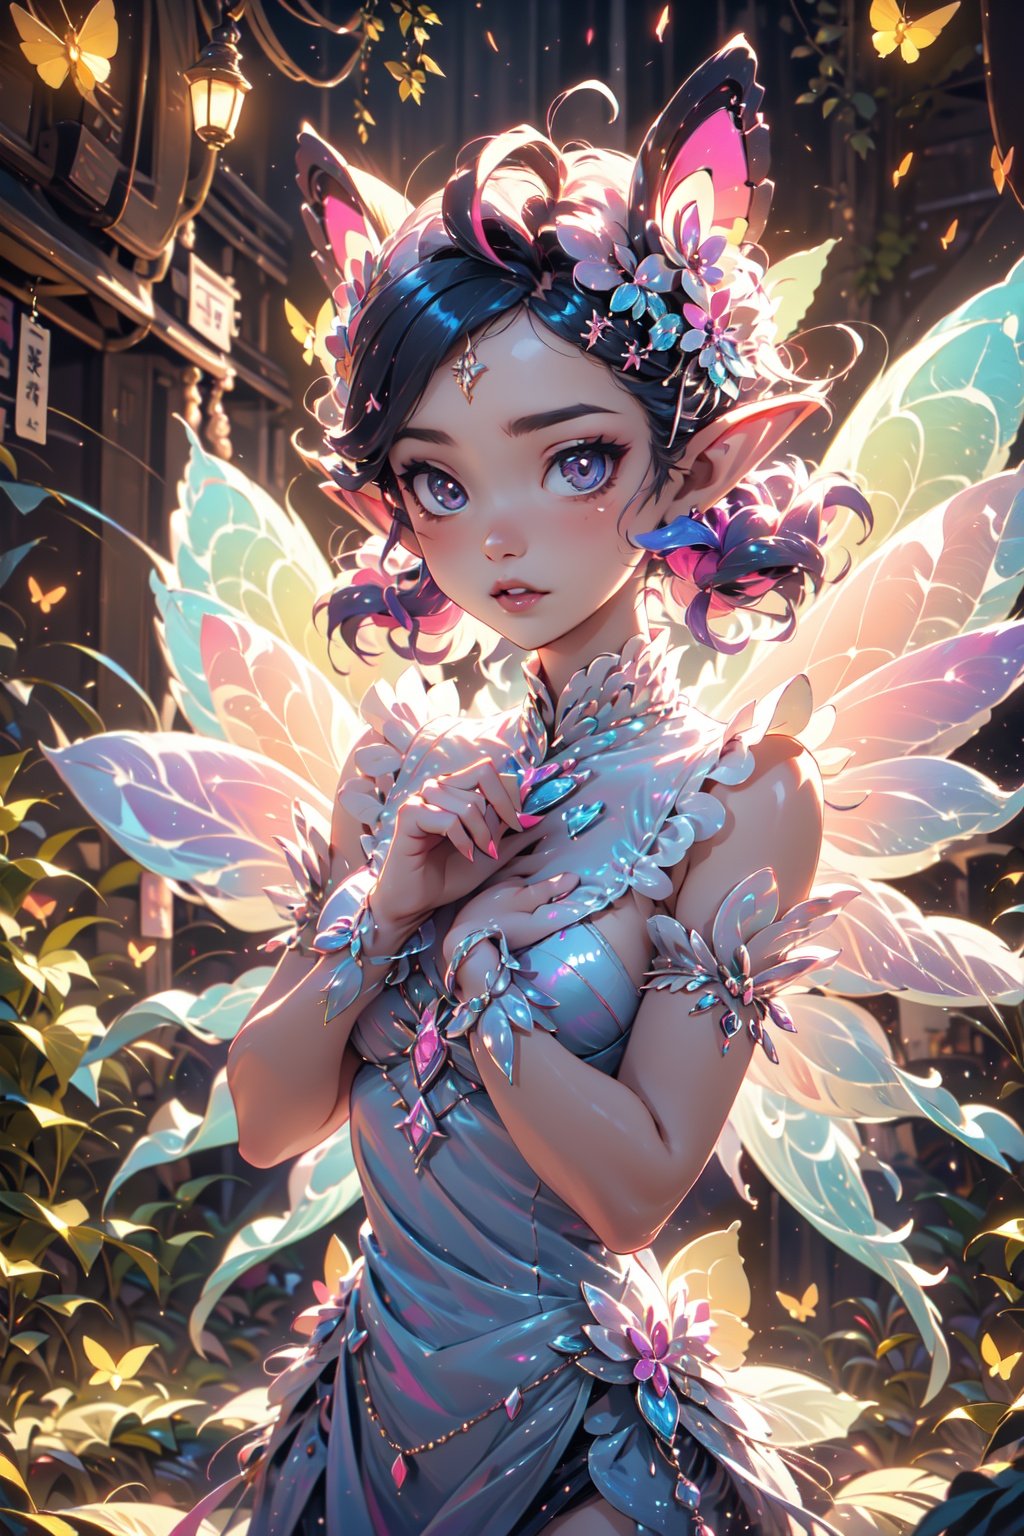 1 girl, cute, small body, fairy, butterfly_wings,gem,(levitating:1.2) hovering above ground,vibrant colors, white dress(((cyberpunk style))), night, soft lighting, Detailedface, (perfectly drawn face, perfect hands)